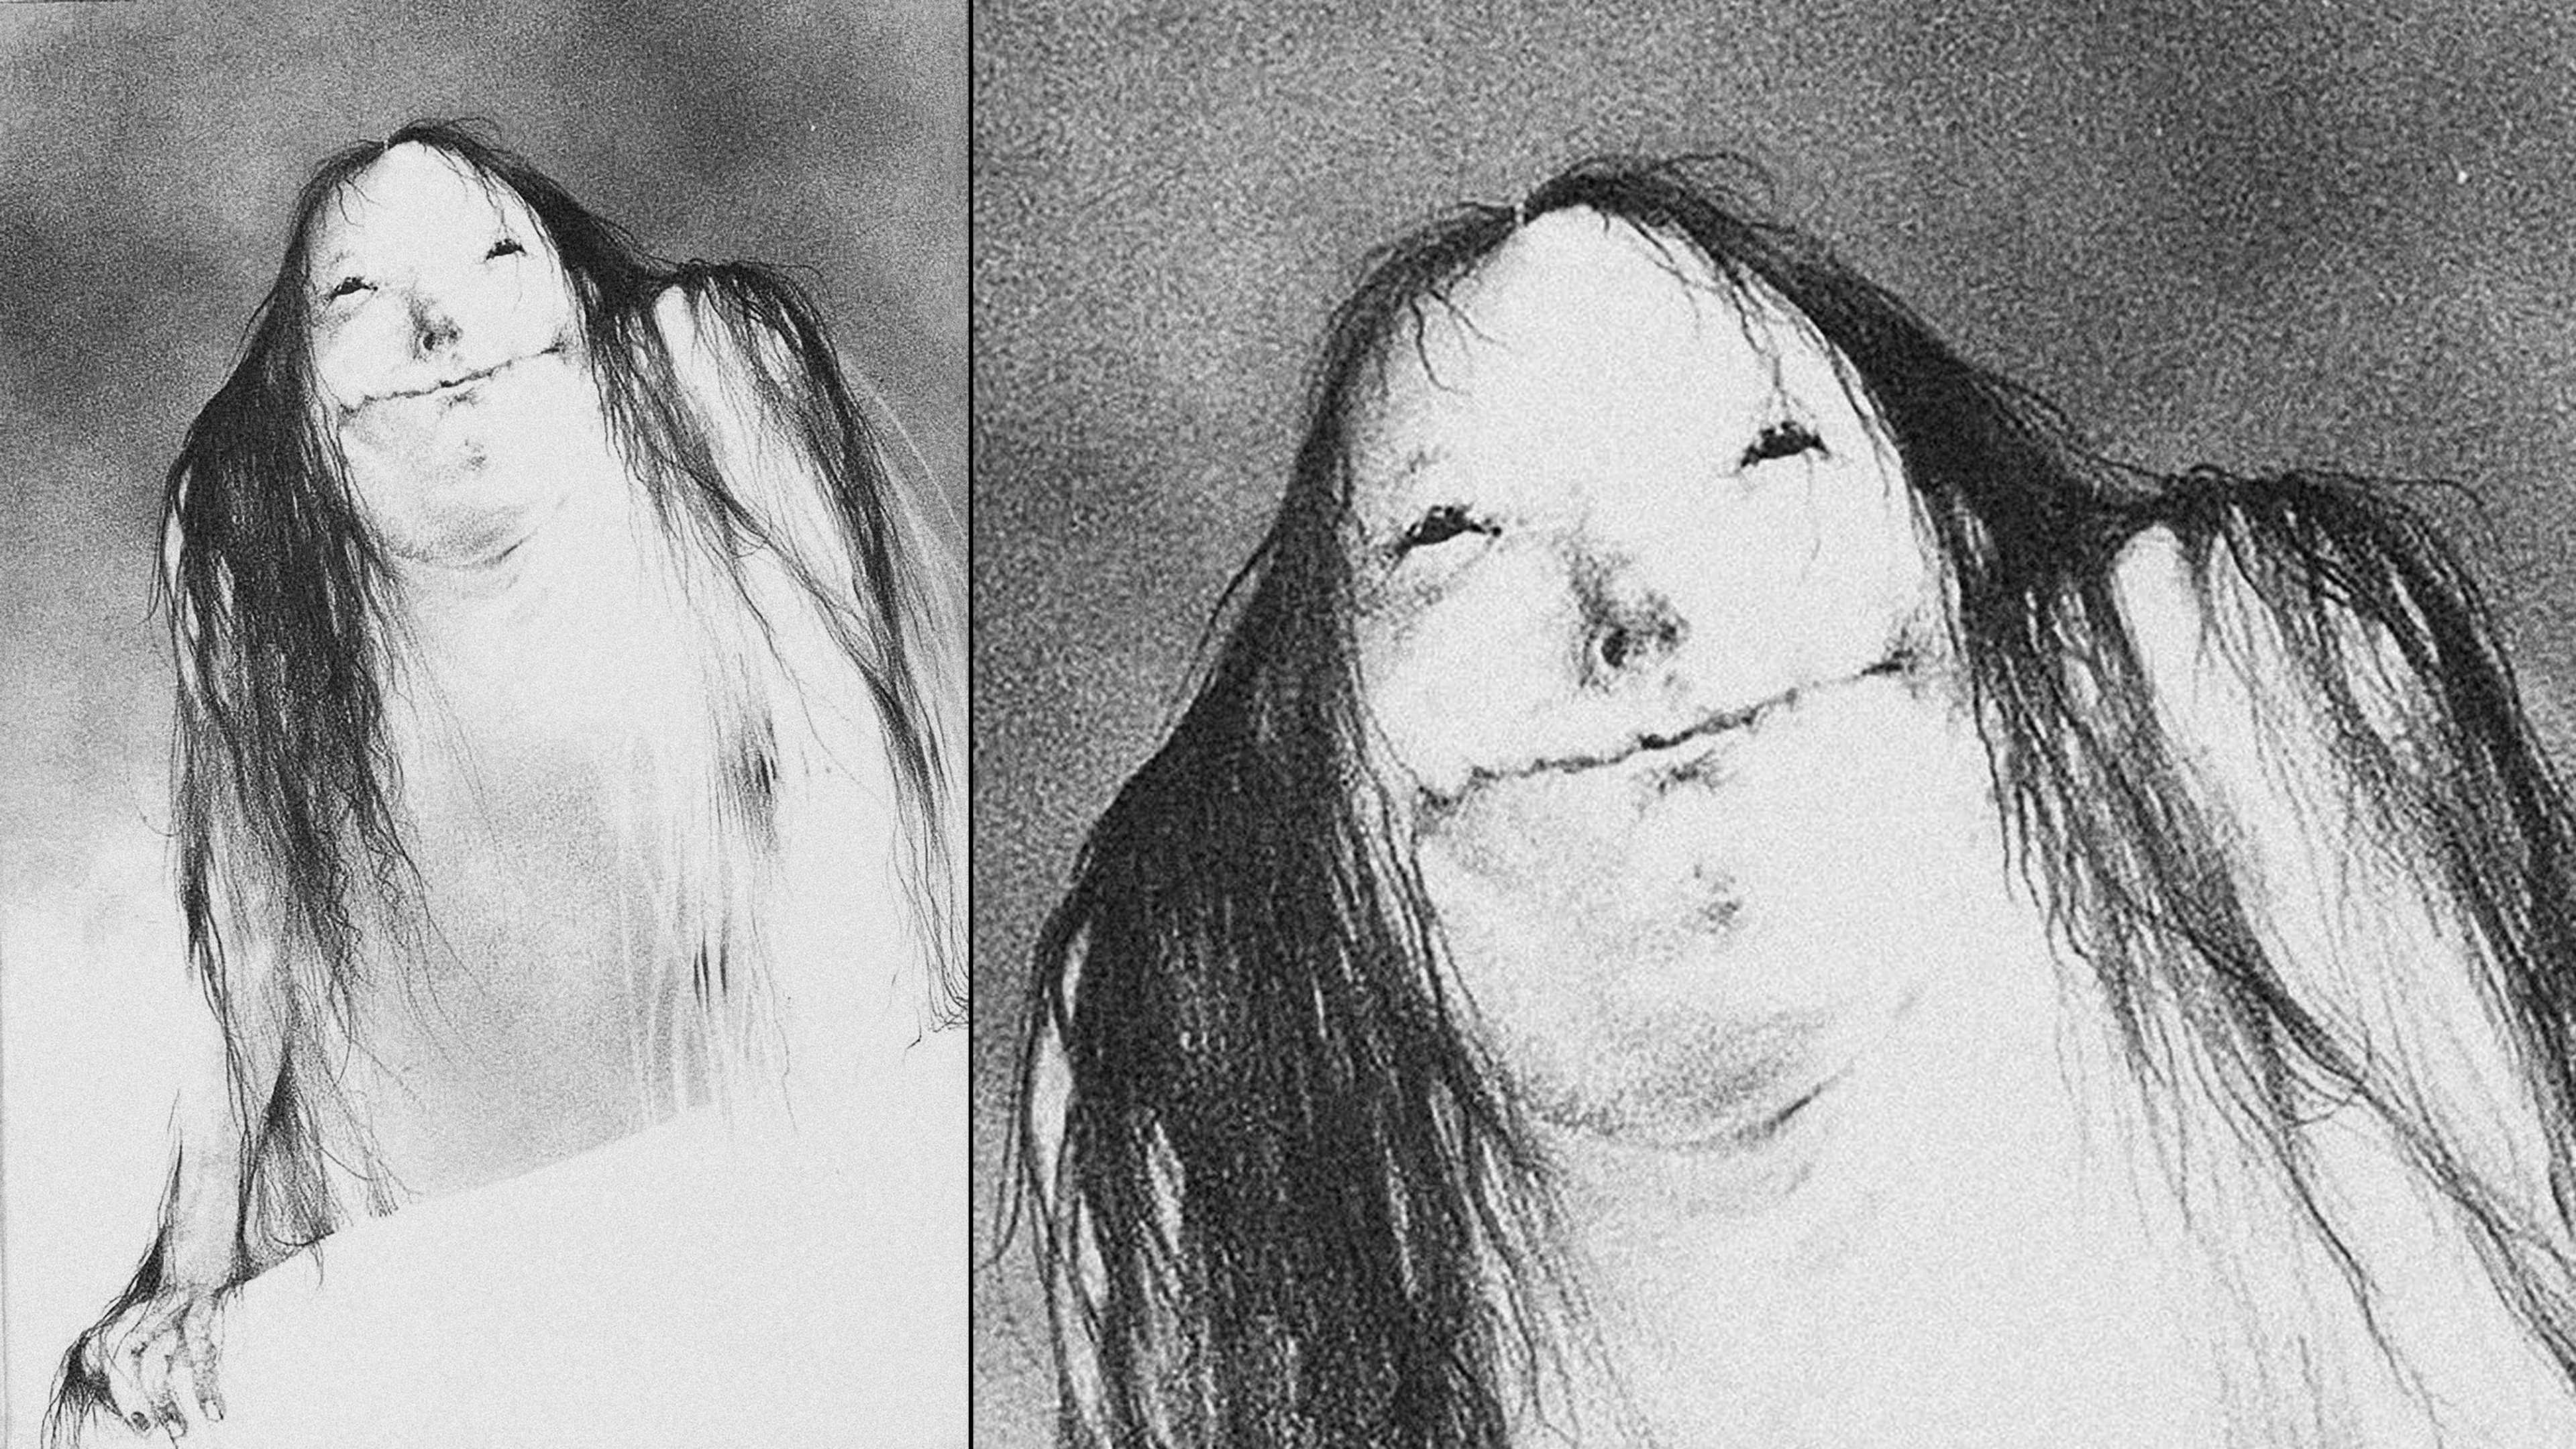 Scary Stories to Tell in the Dark was a collection of short horror stories written by Alvin Schwartz and illustrated by Stephen Gammell from 1981 to 1991. This is Gammell's illustration of The Pale Lady from the story "The Dream."